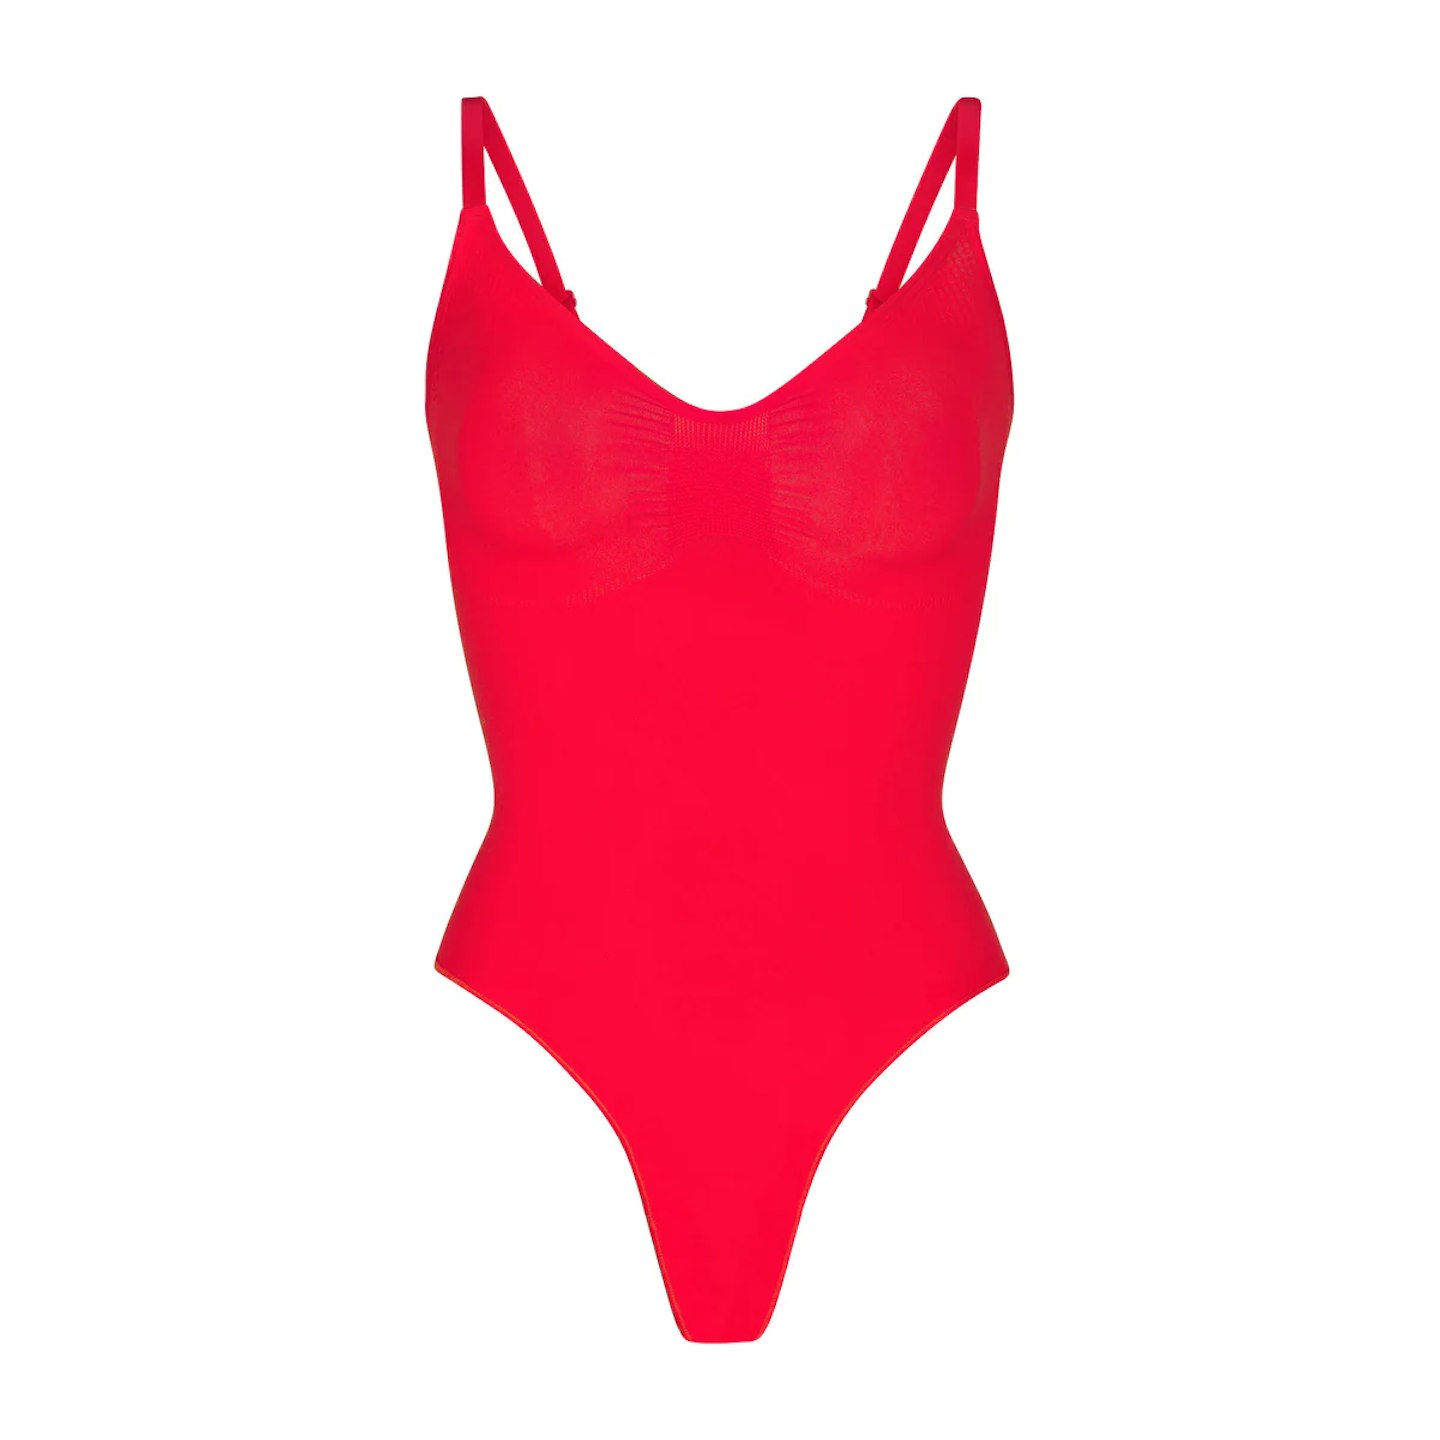 SKIMS SEAMLESS SCULPT THONG BODYSUIT Size undefined - $68 - From